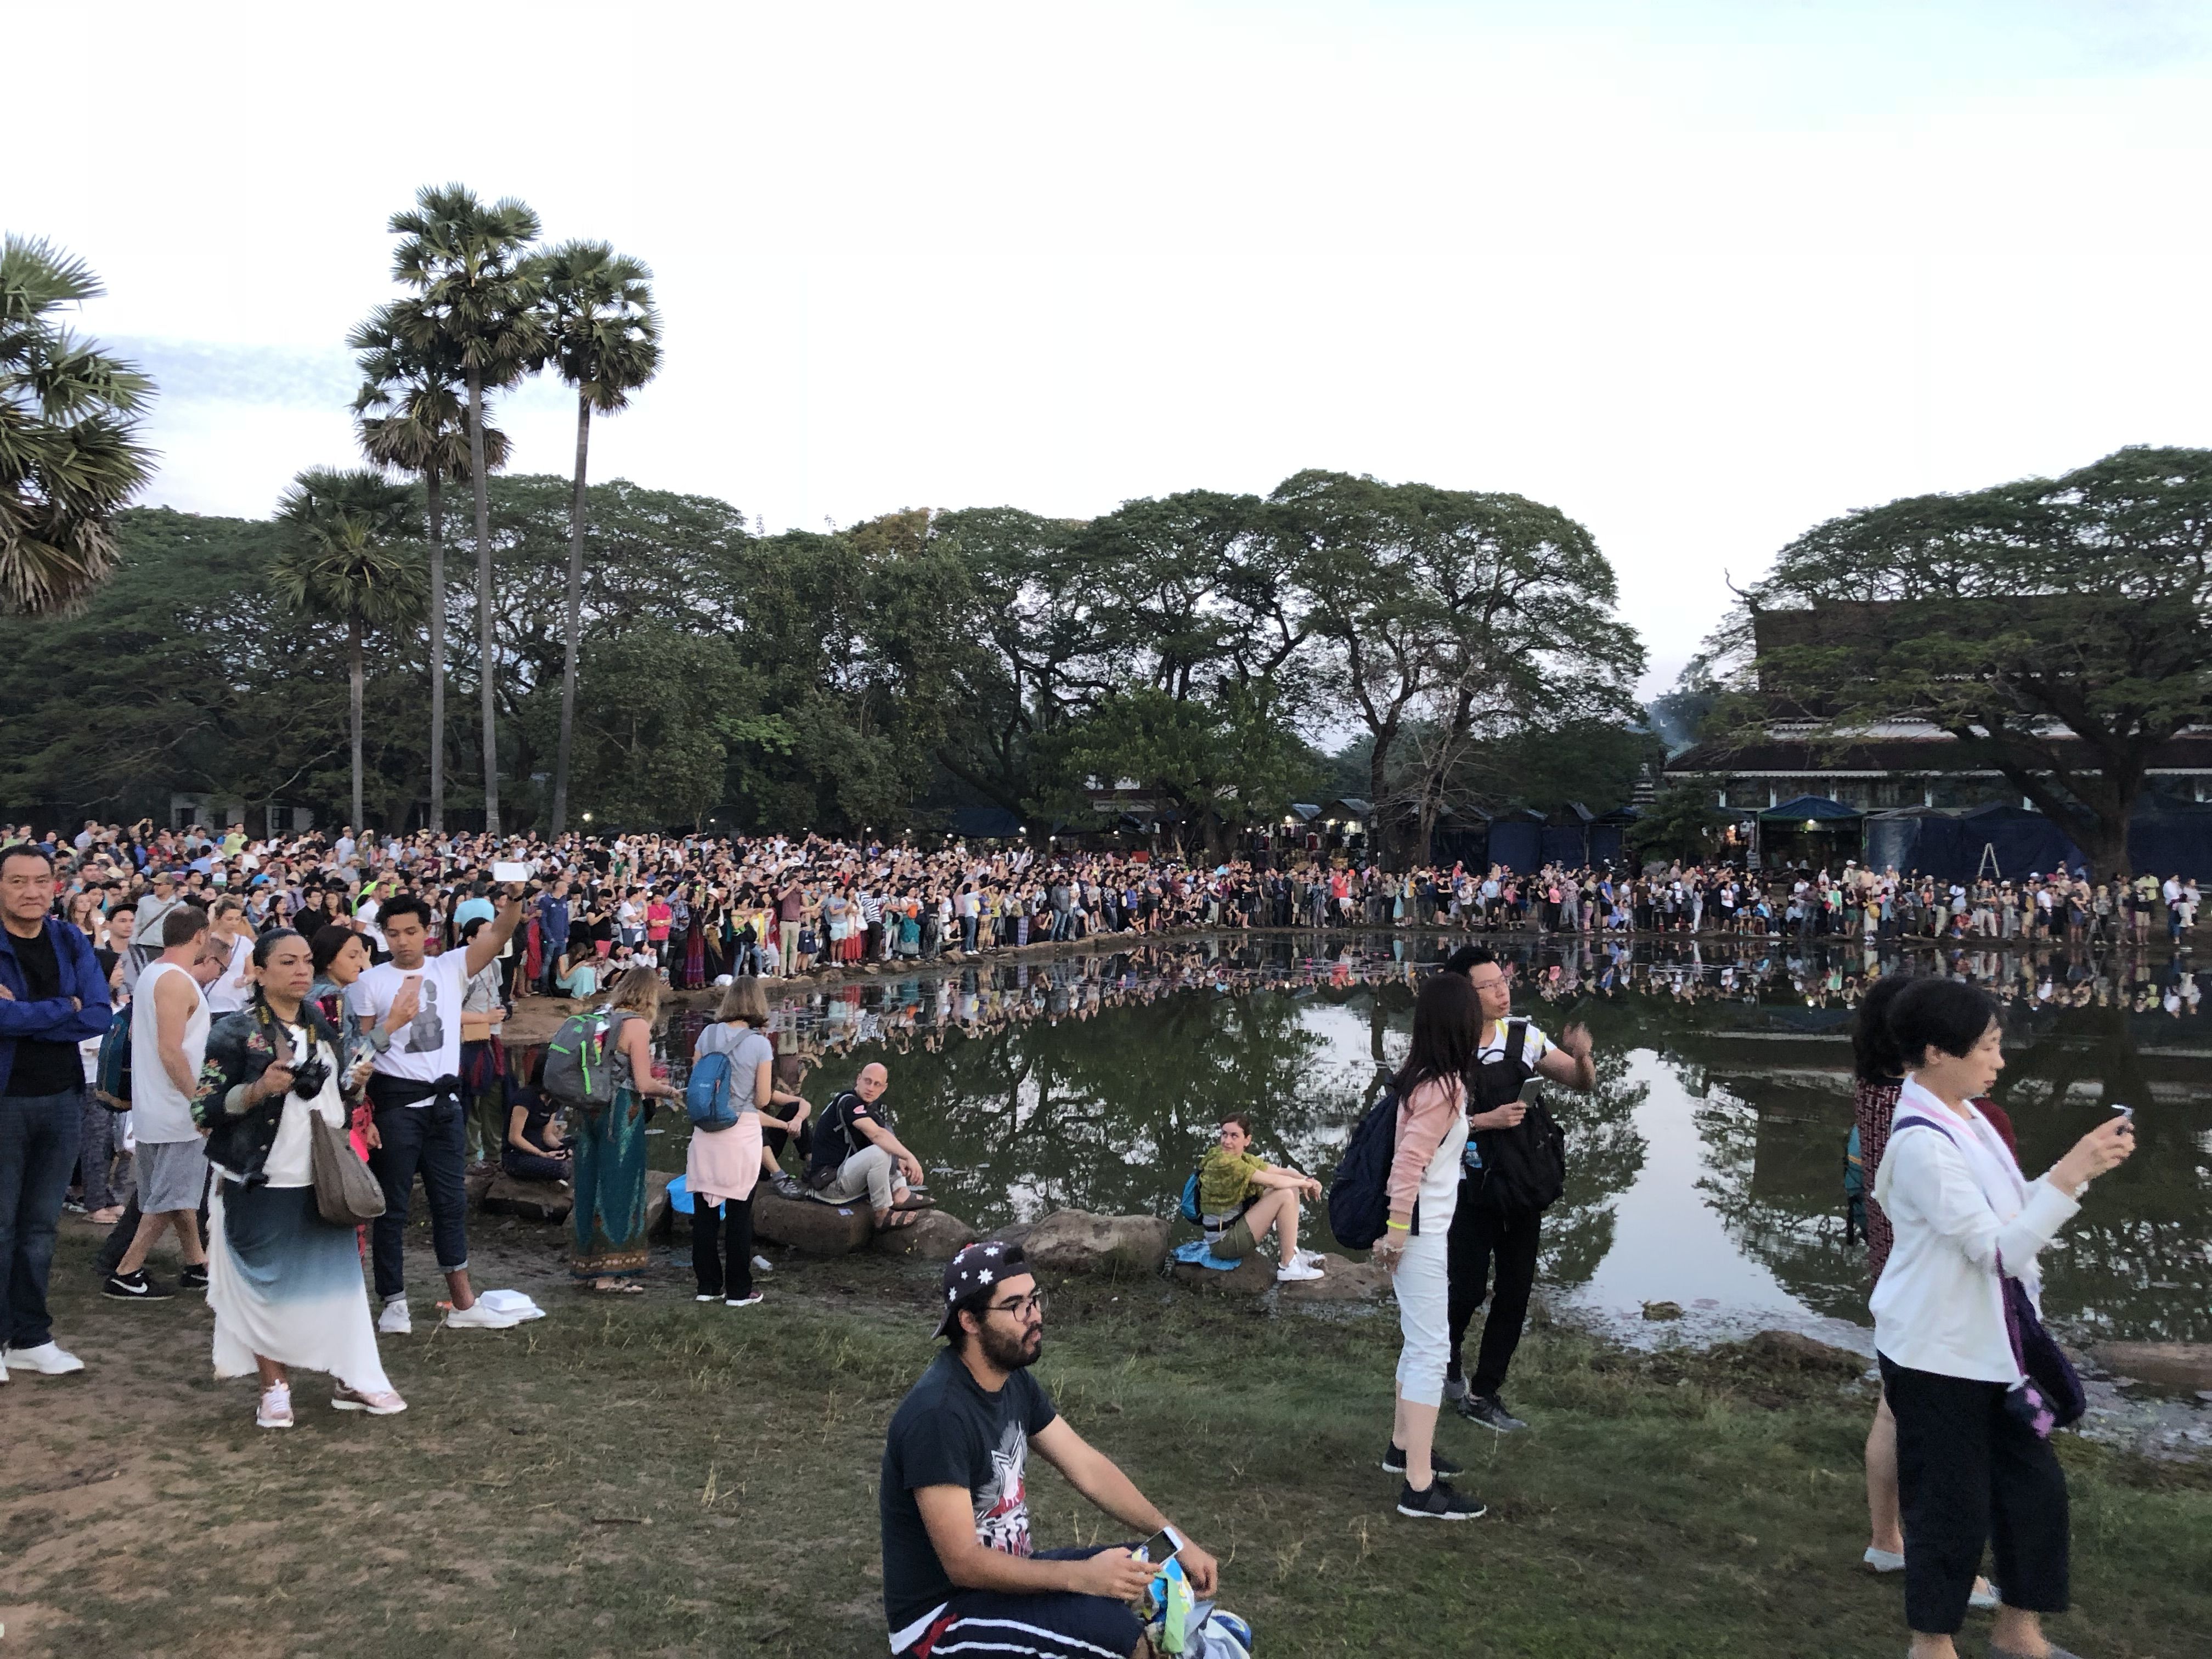 We're on the edge of the crowd which is standing around a lake.  In the distance the crowd is packed. There are trees behind them.